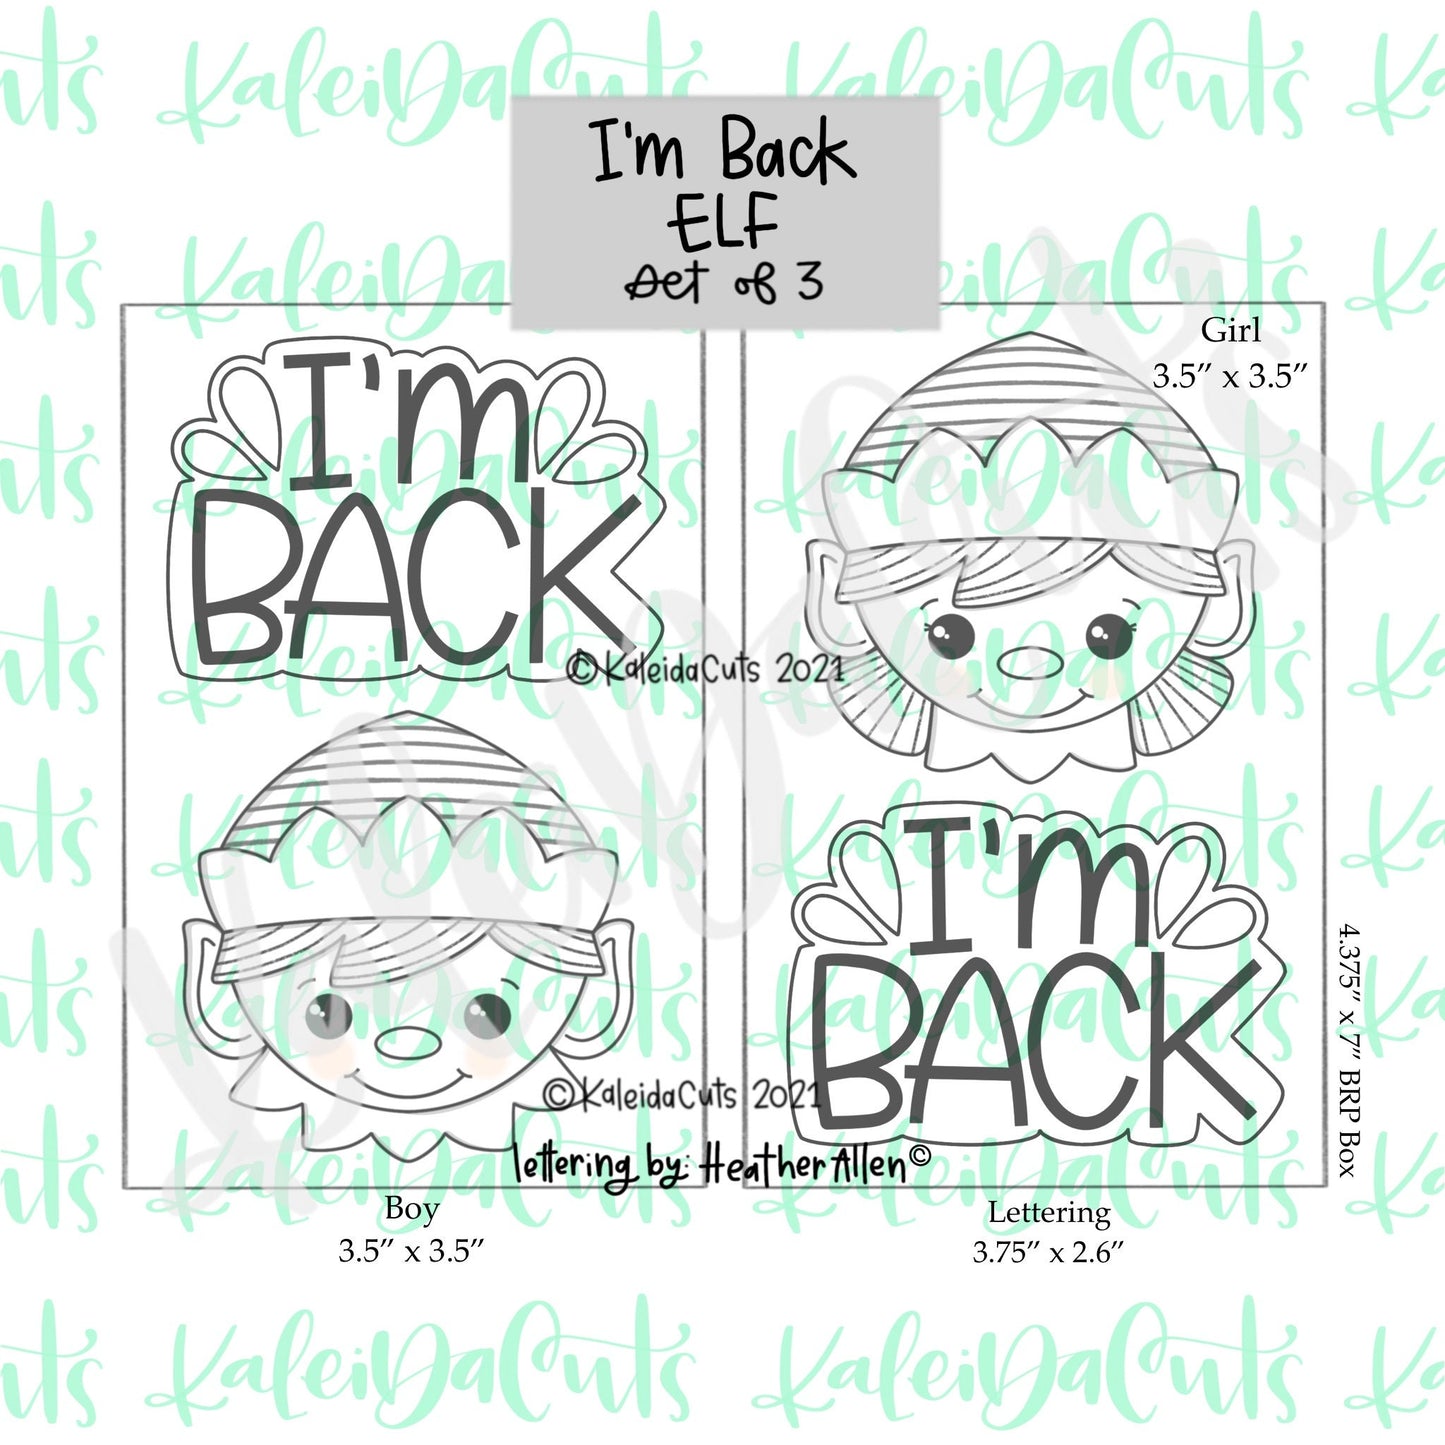 I'm Back Set of 3 Cookie Cutters